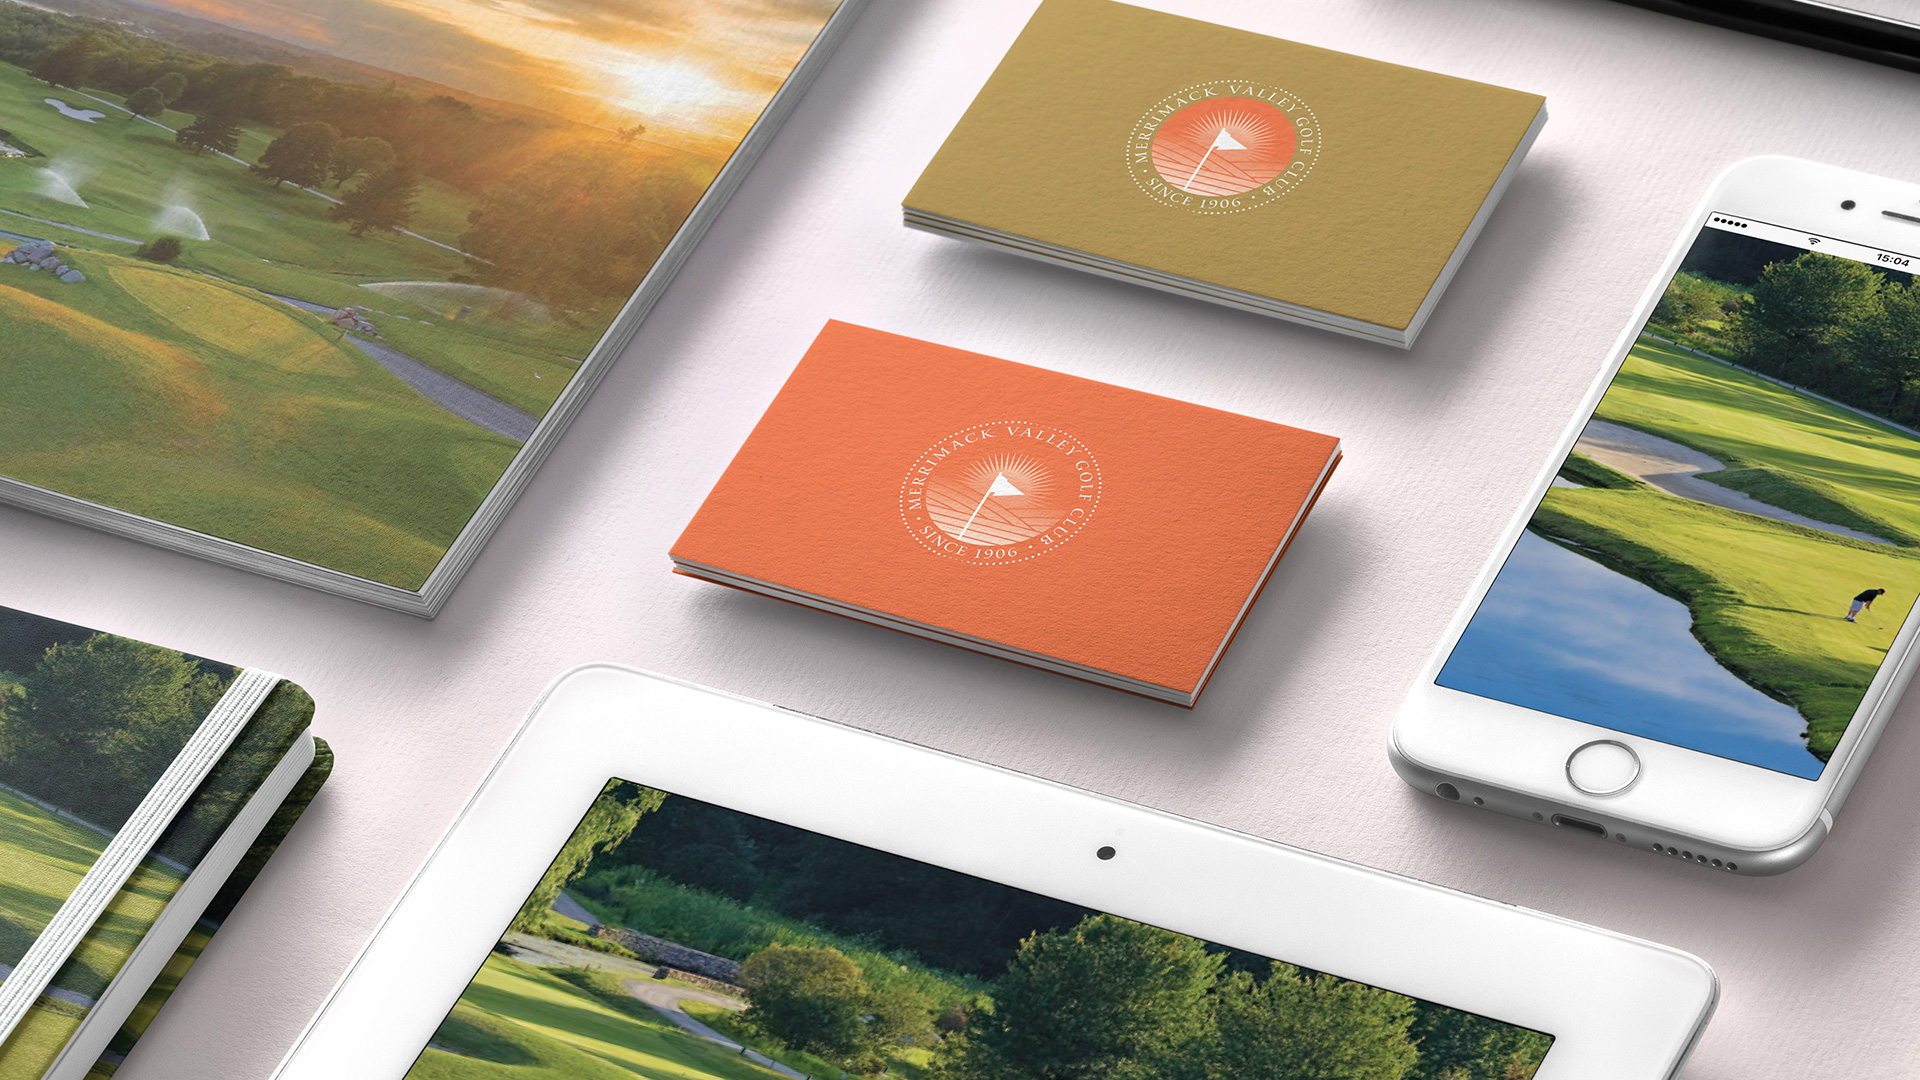 merrimack golf club branding with cards and iPhone